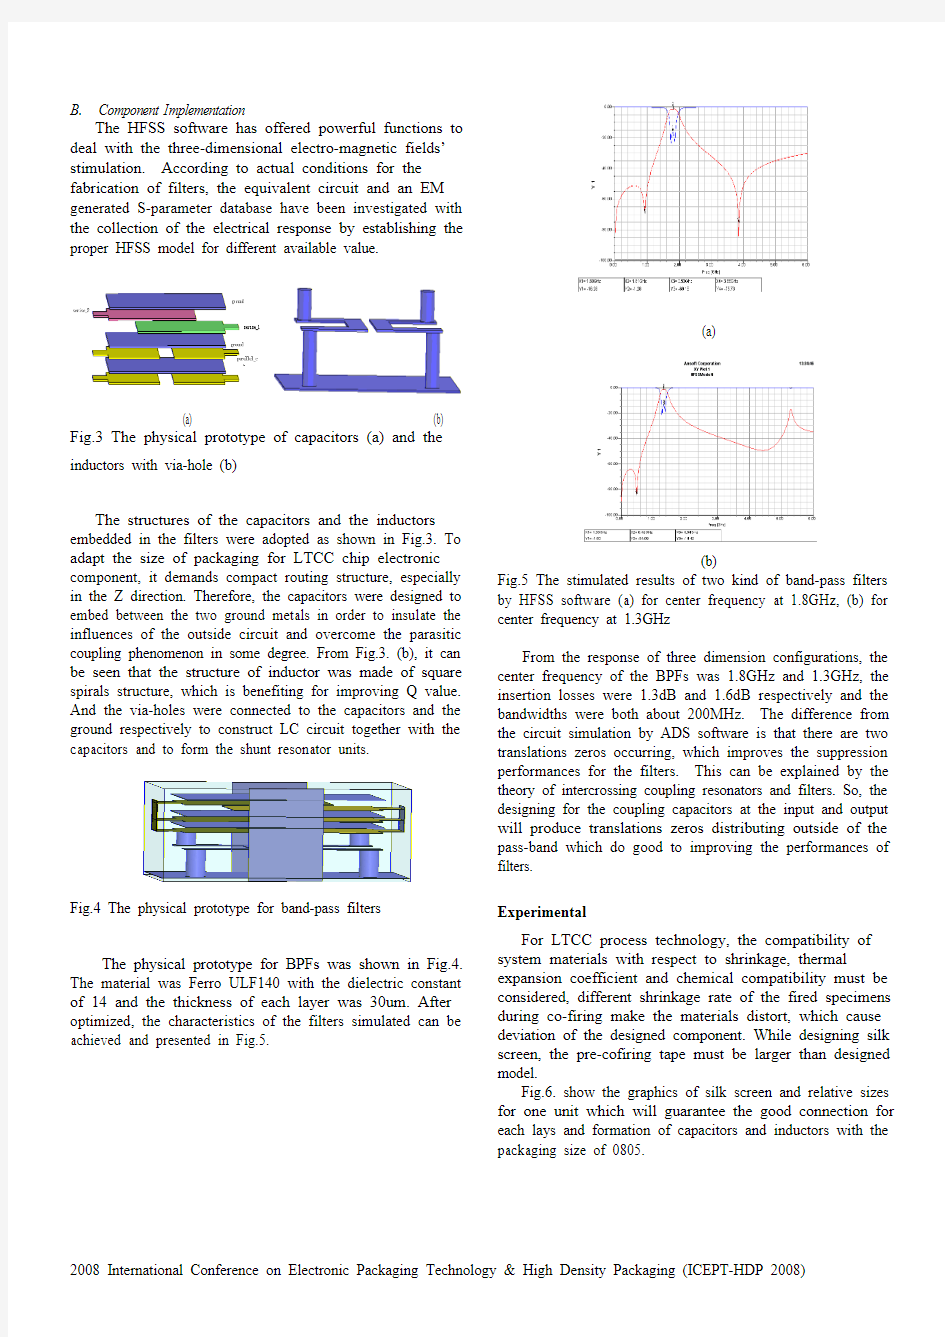 The Design and Fabrication of RF Band Pass Filter by LTCC Technology